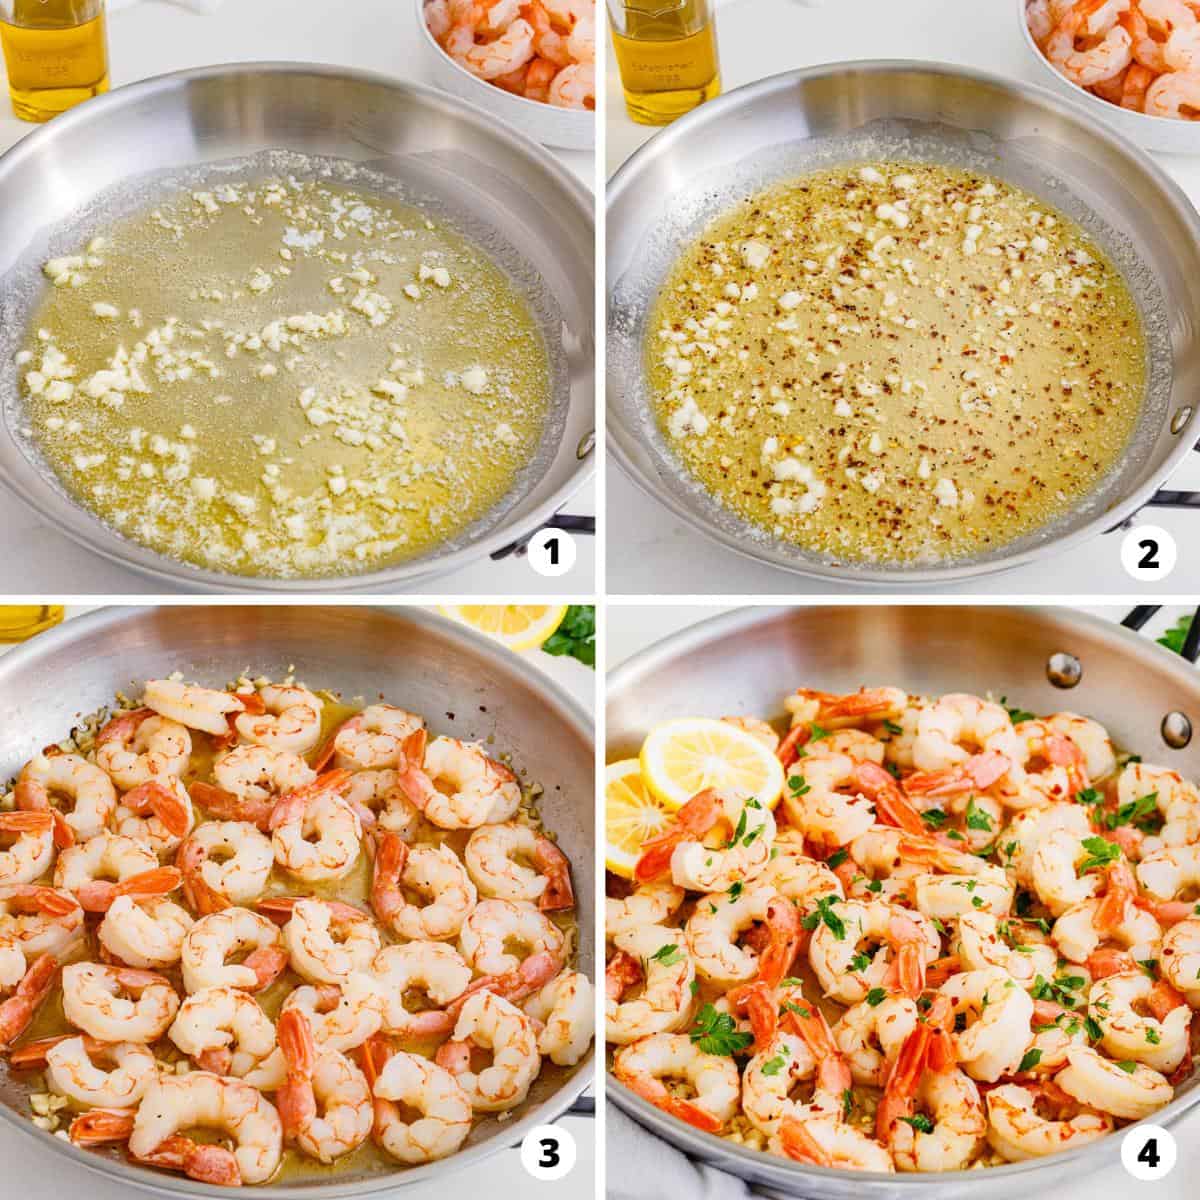 Showing how to make shrimp scampi in a 4 step collage.